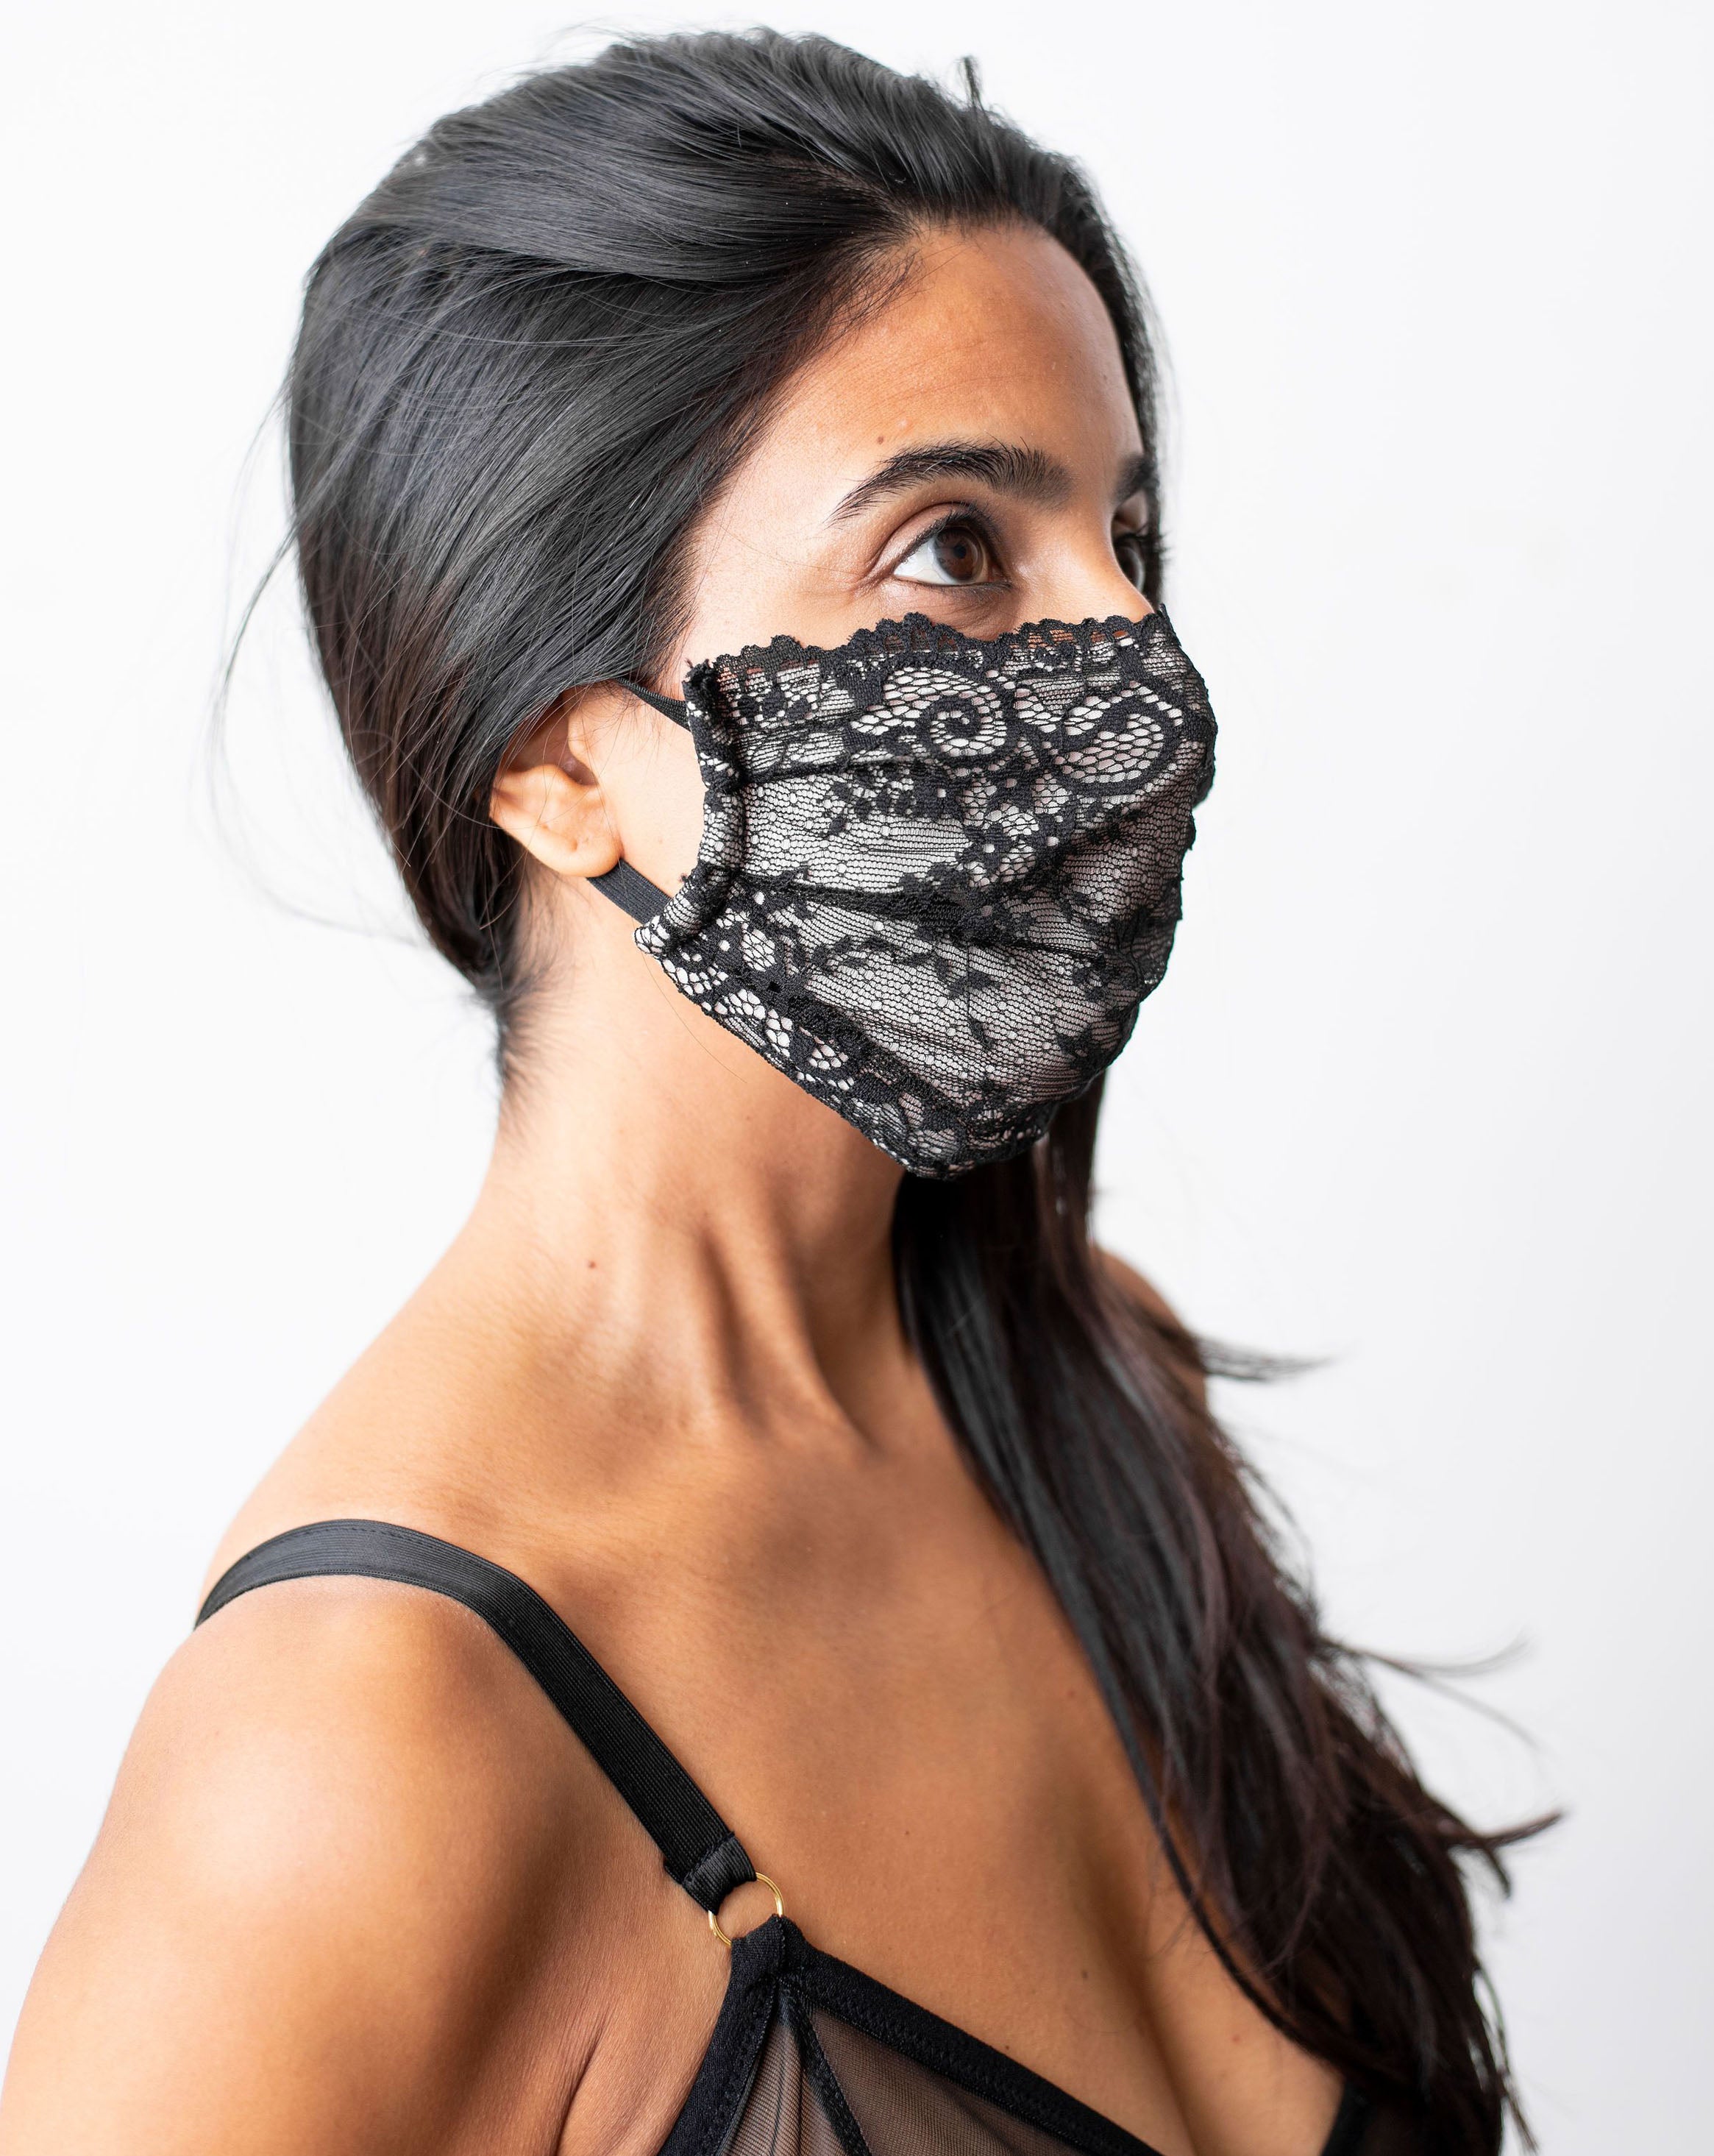 Ruhee, female with long black hair wearing a black lace, organic cotton face mask. Side shot against a white backdrop.